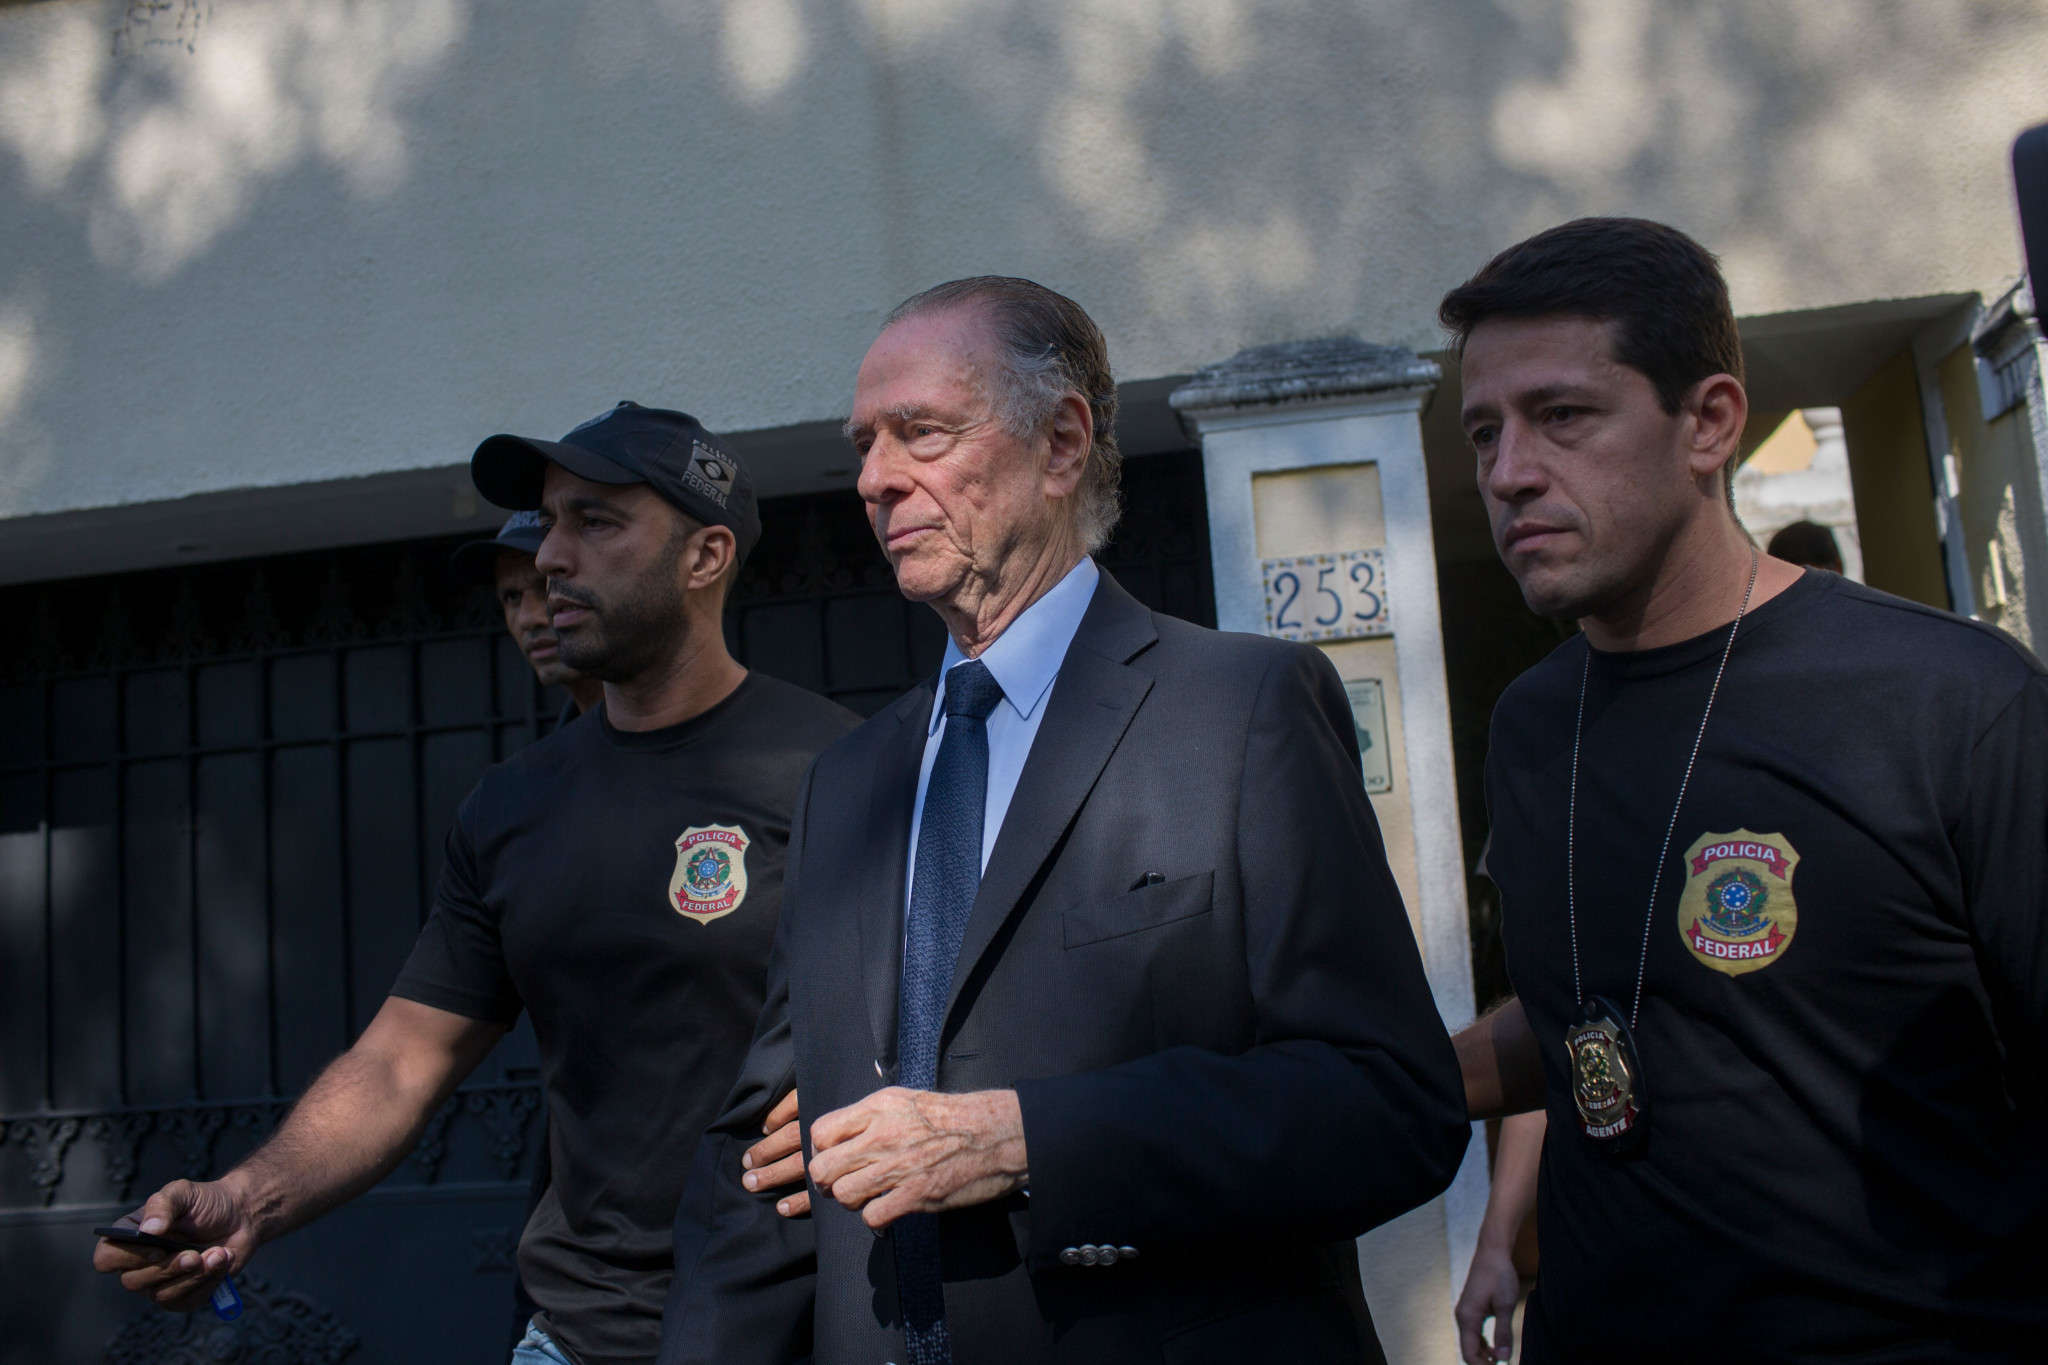 Nuzman and Brazilian Olympic Committee sanctioned by IOC as relations suspended with Rio 2016